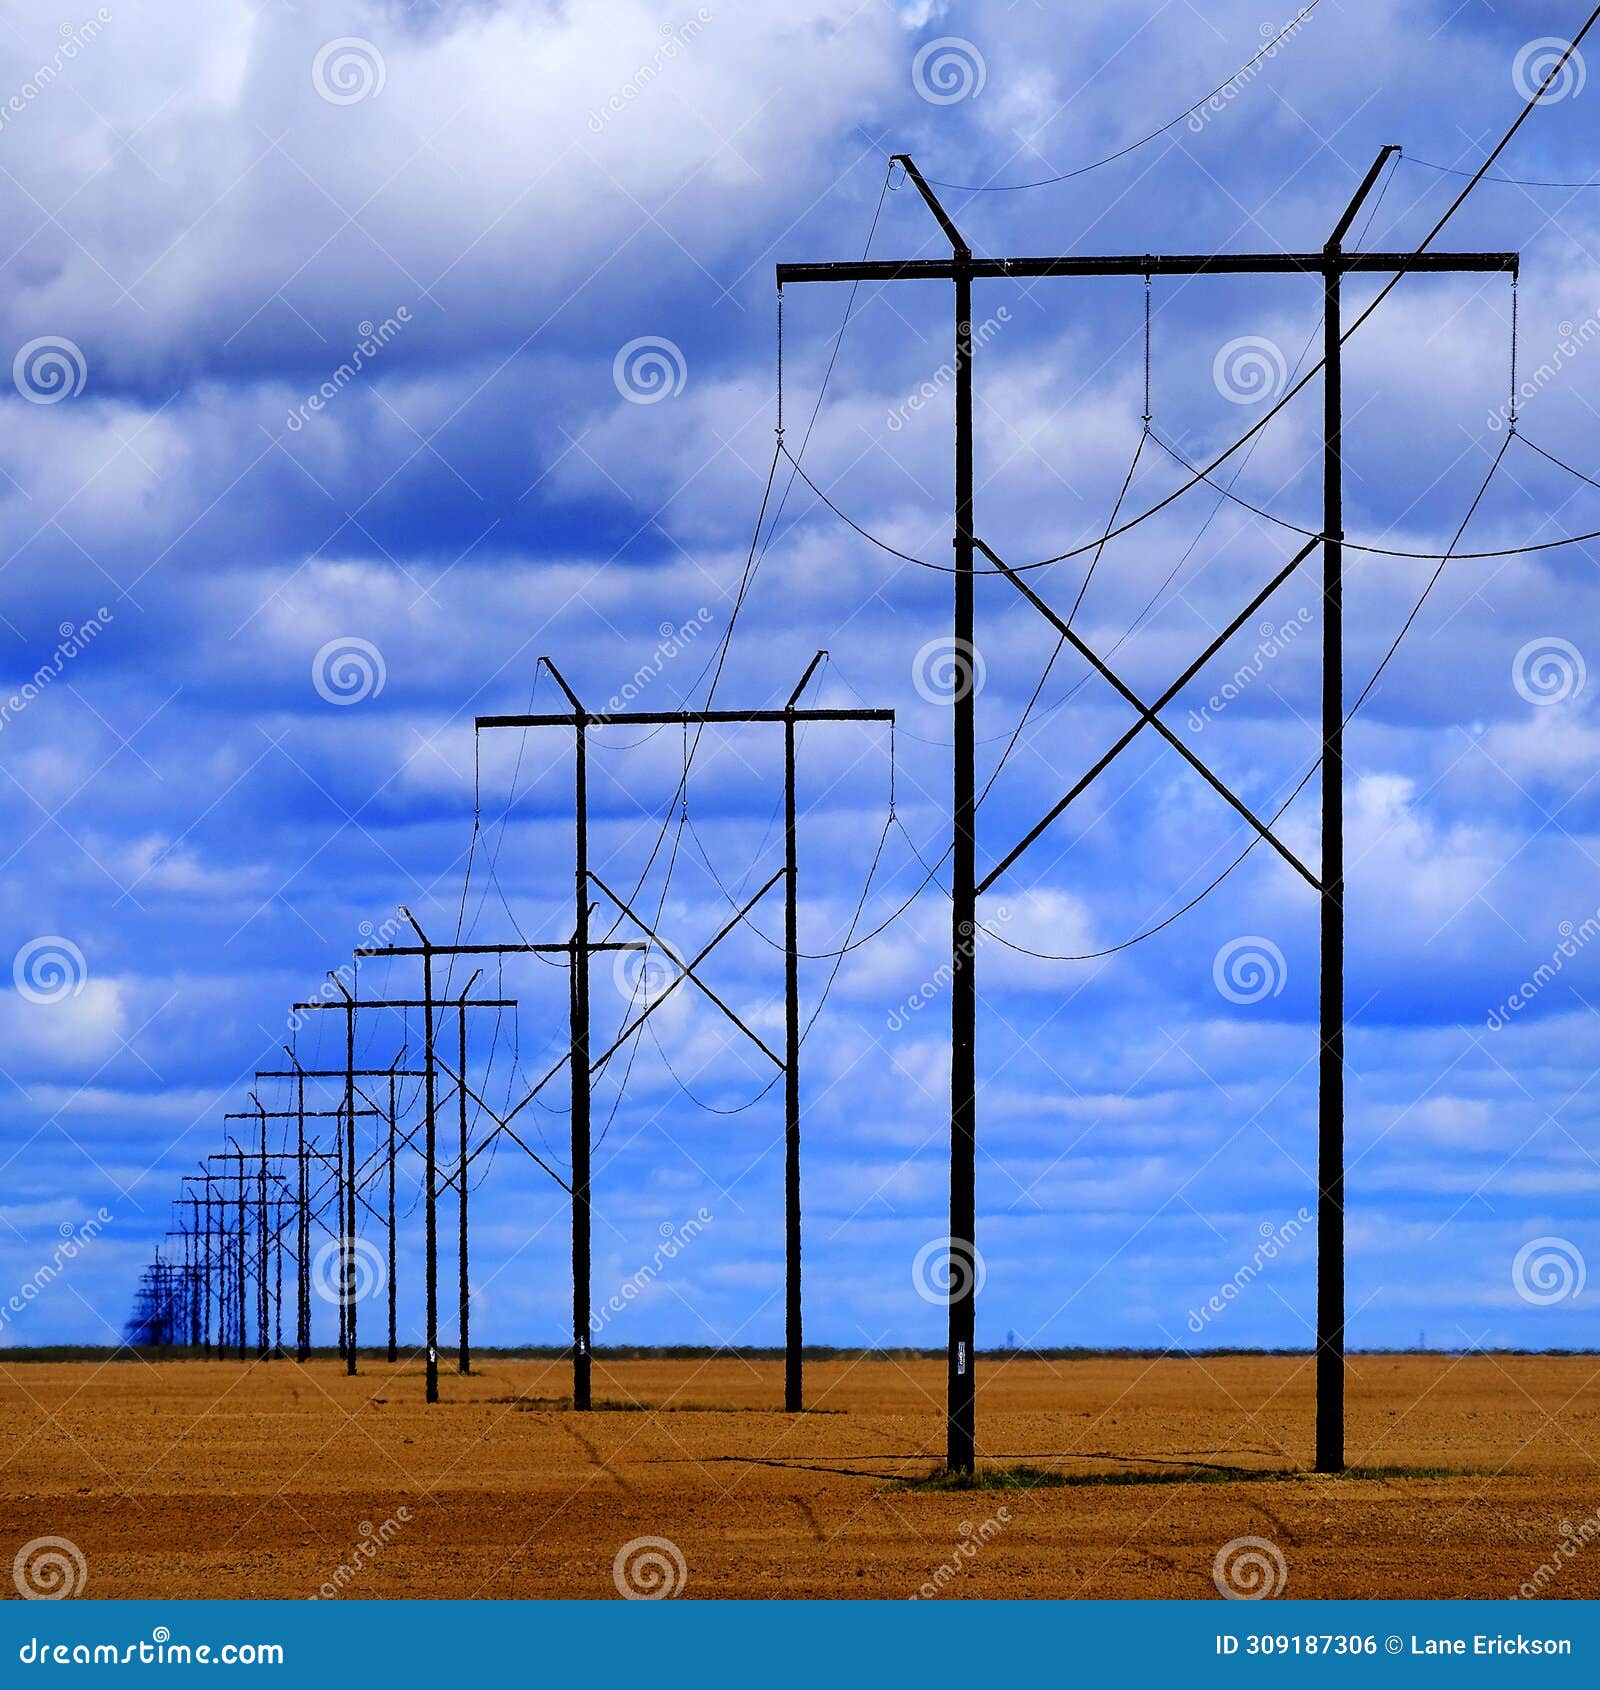 powerlines in field with blue sky and clouds